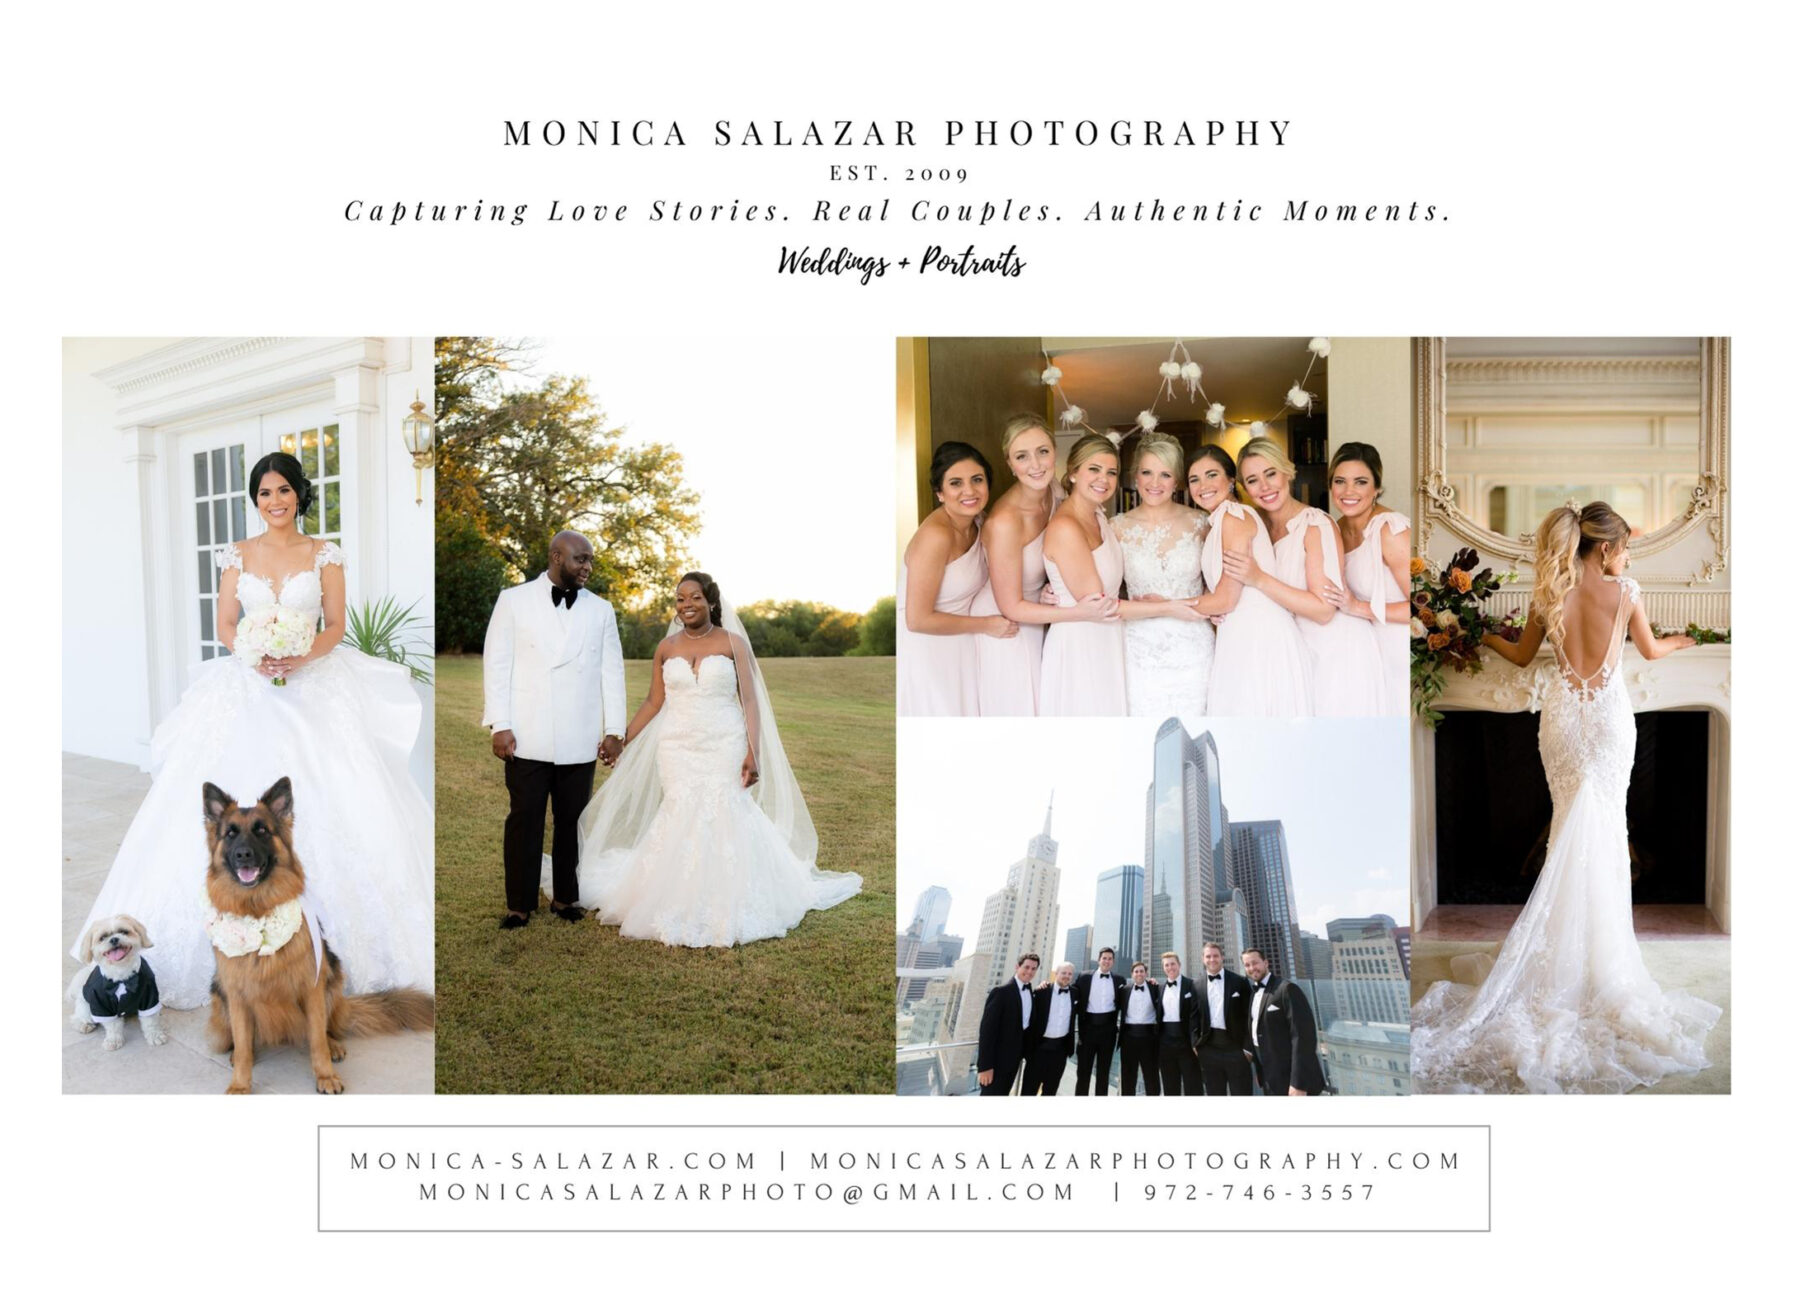 Dallas Wedding Photographs by Monica Salazar wedding photographer. Bridal show special offer for all engaged brides and grooms with weddings in Dallas, Fort Worth, Austin, Mansfield, Frisco, Arlington, Irving, Las Colinas, Little Elm, Denton, and many other Texas cities. Dallas Fort Worth wedding photography pricing and packages.